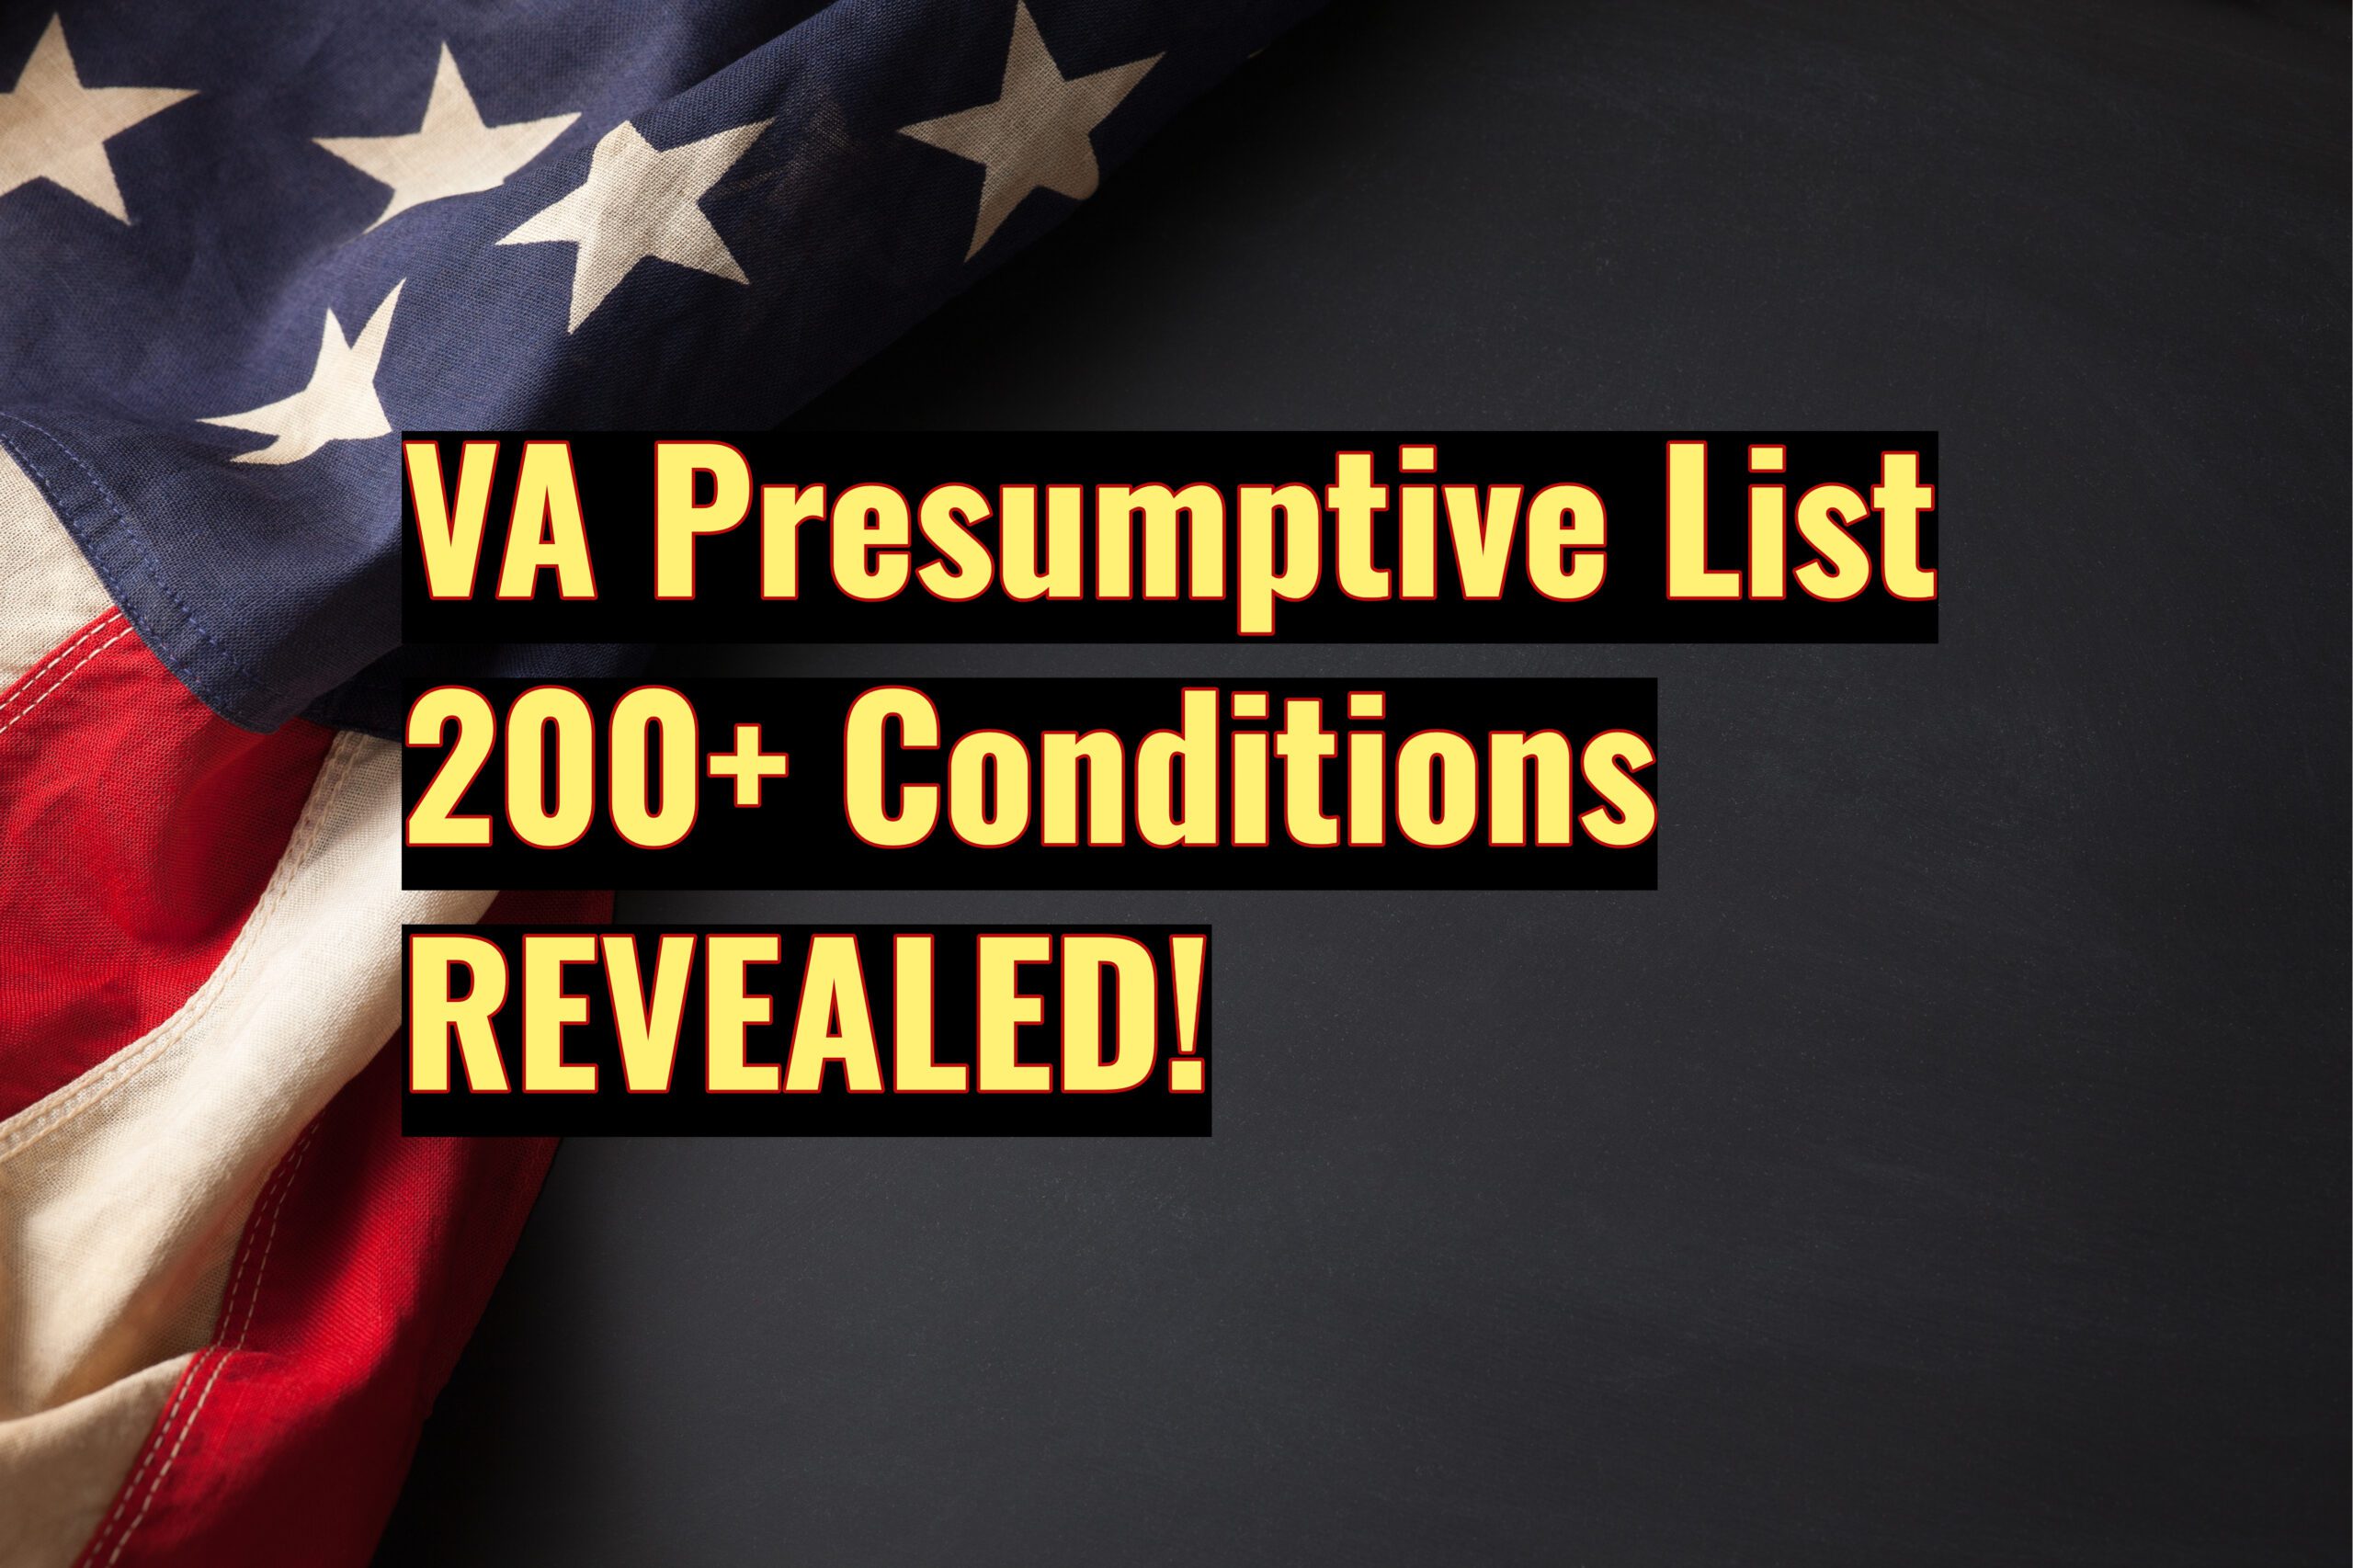 VA Presumptive List Explained Top 200+ Conditions Eligible for